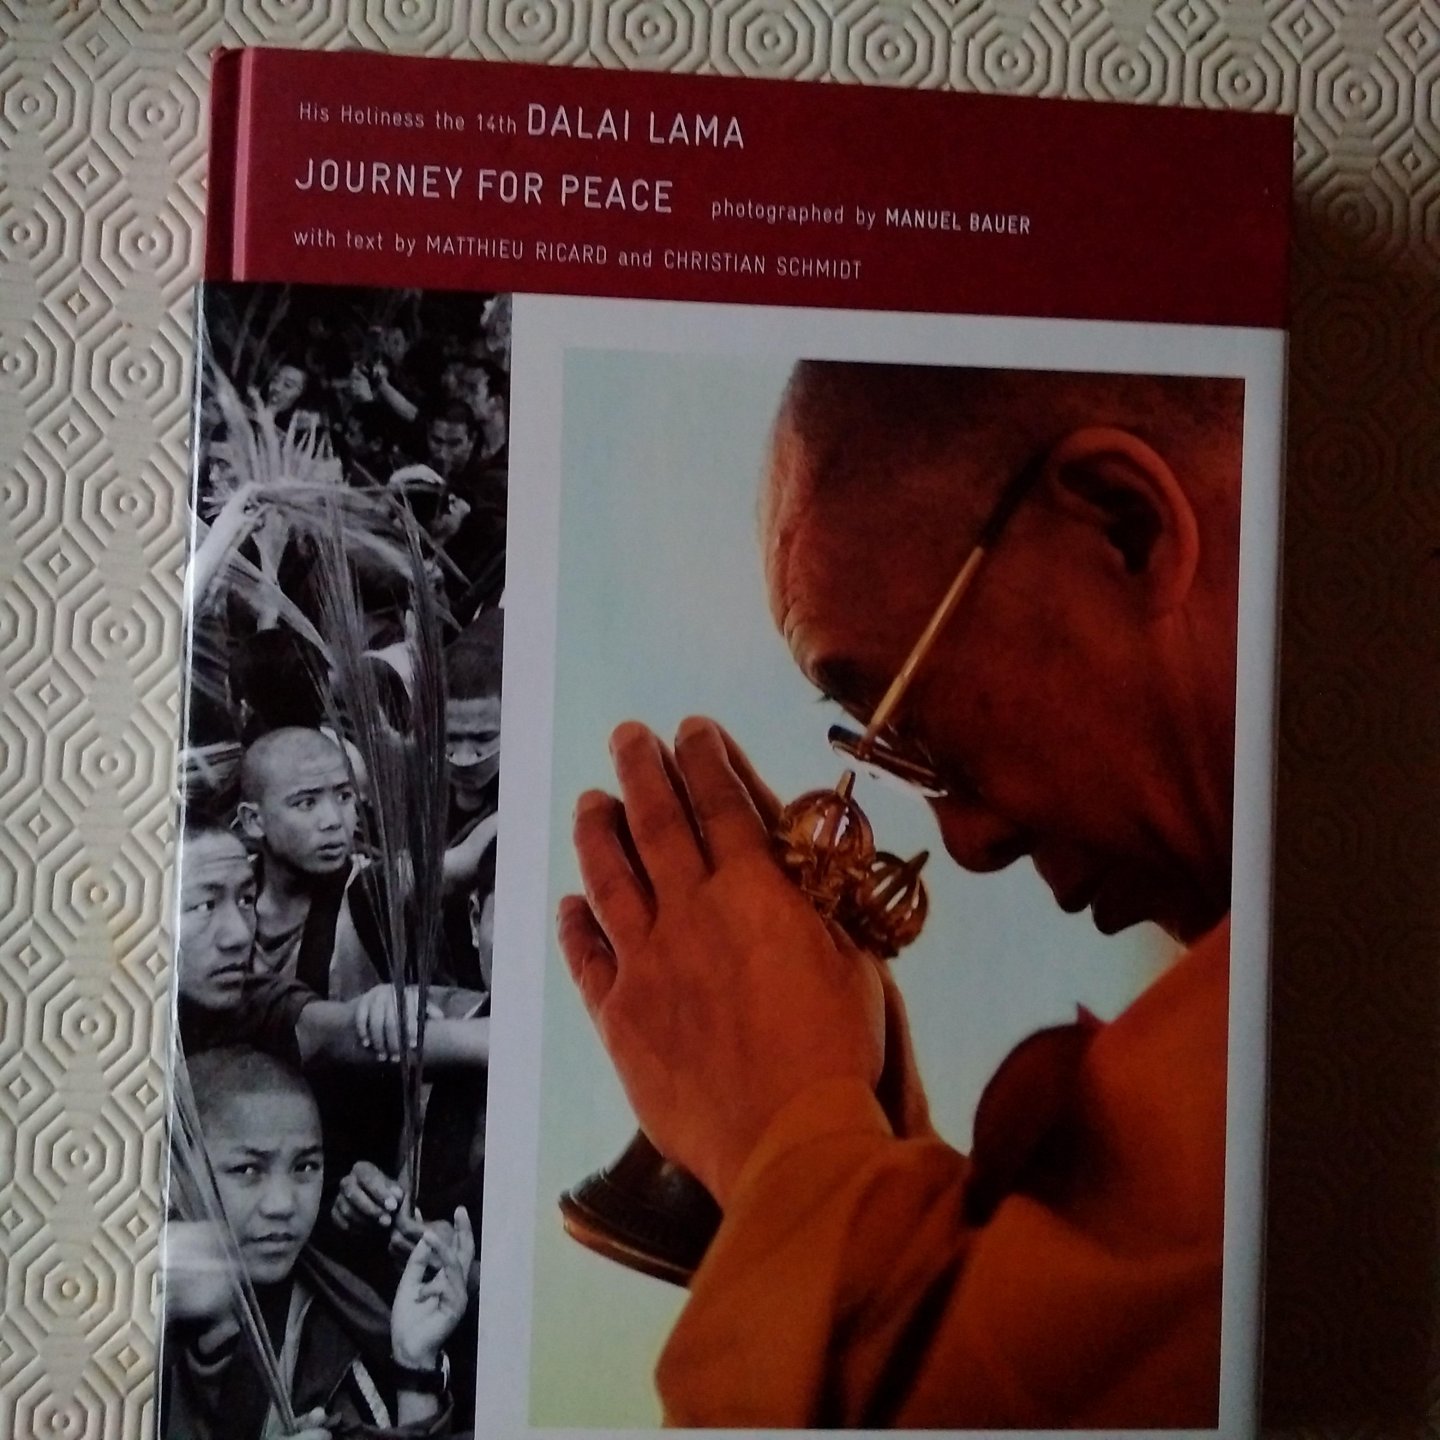 Ricard, Matthieu & Schmidt, Christian - His Holiness the 14th Dalai Lama. Journey for Peacee